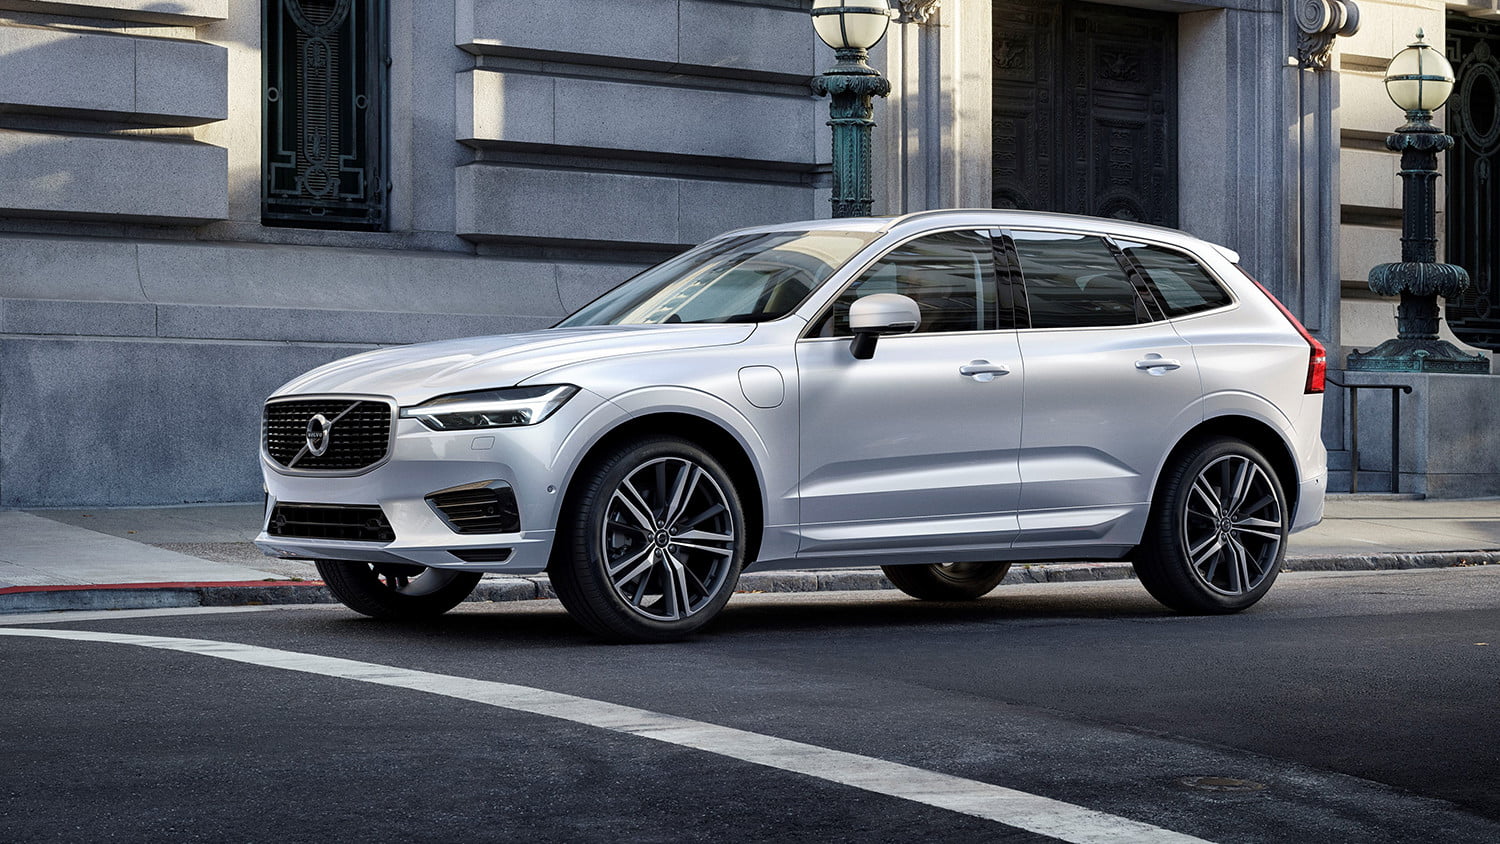 Plugin hybrid Volvo XC60 T8 flagship SUV provides outstanding value